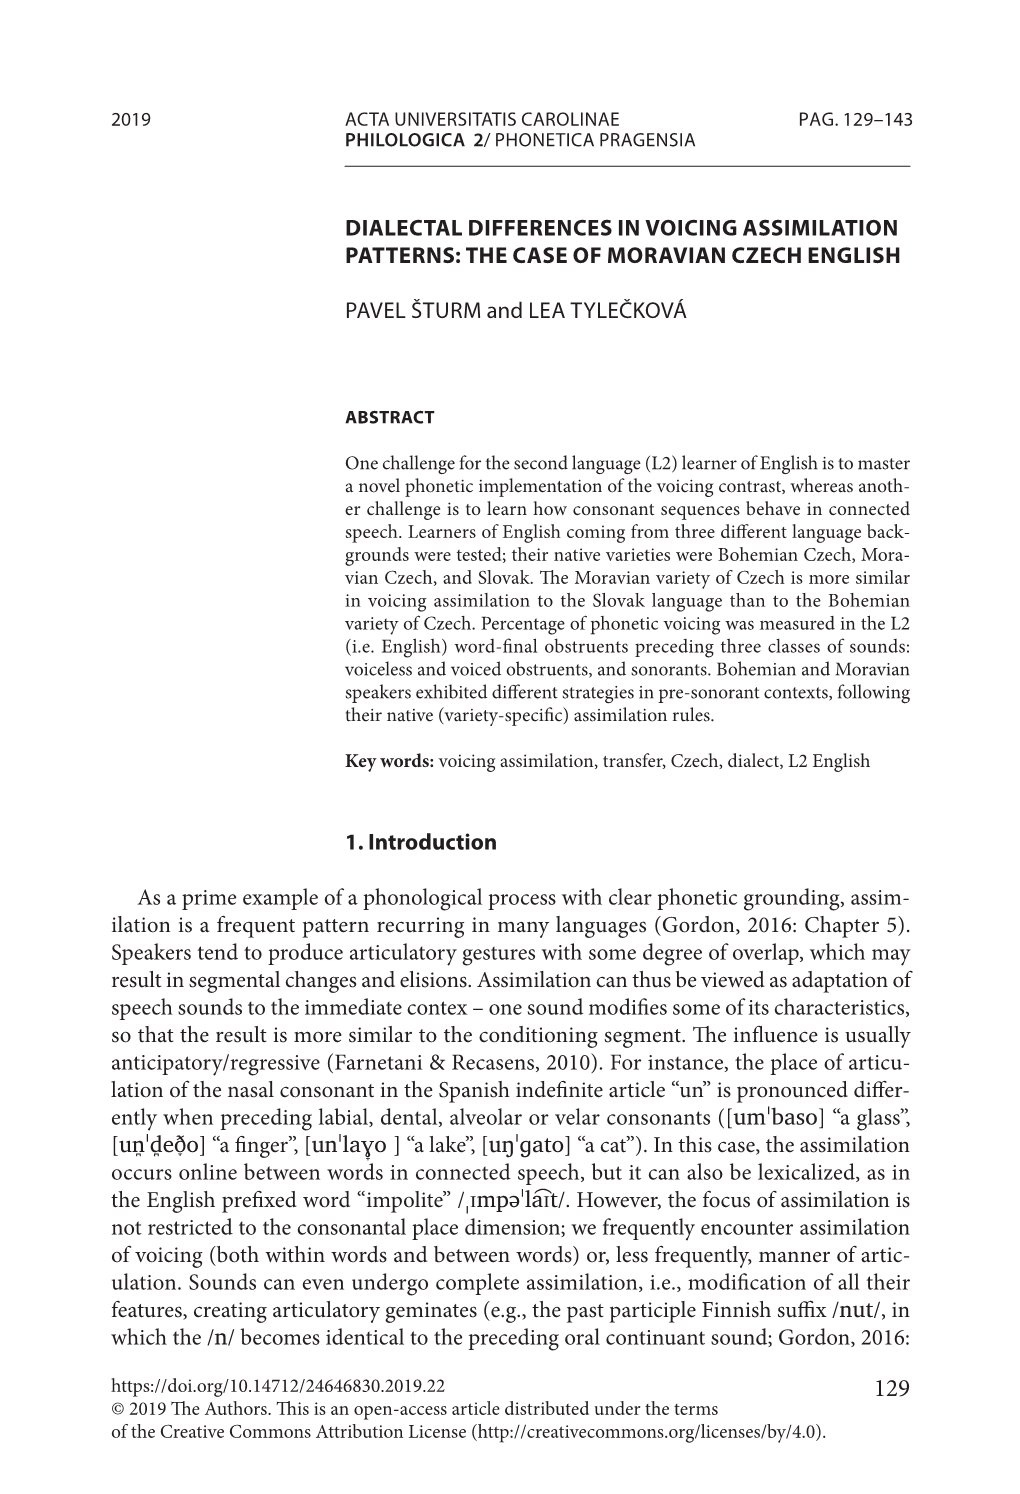 Dialectal Differences in Voicing Assimilation Patterns: the Case of Moravian Czech English